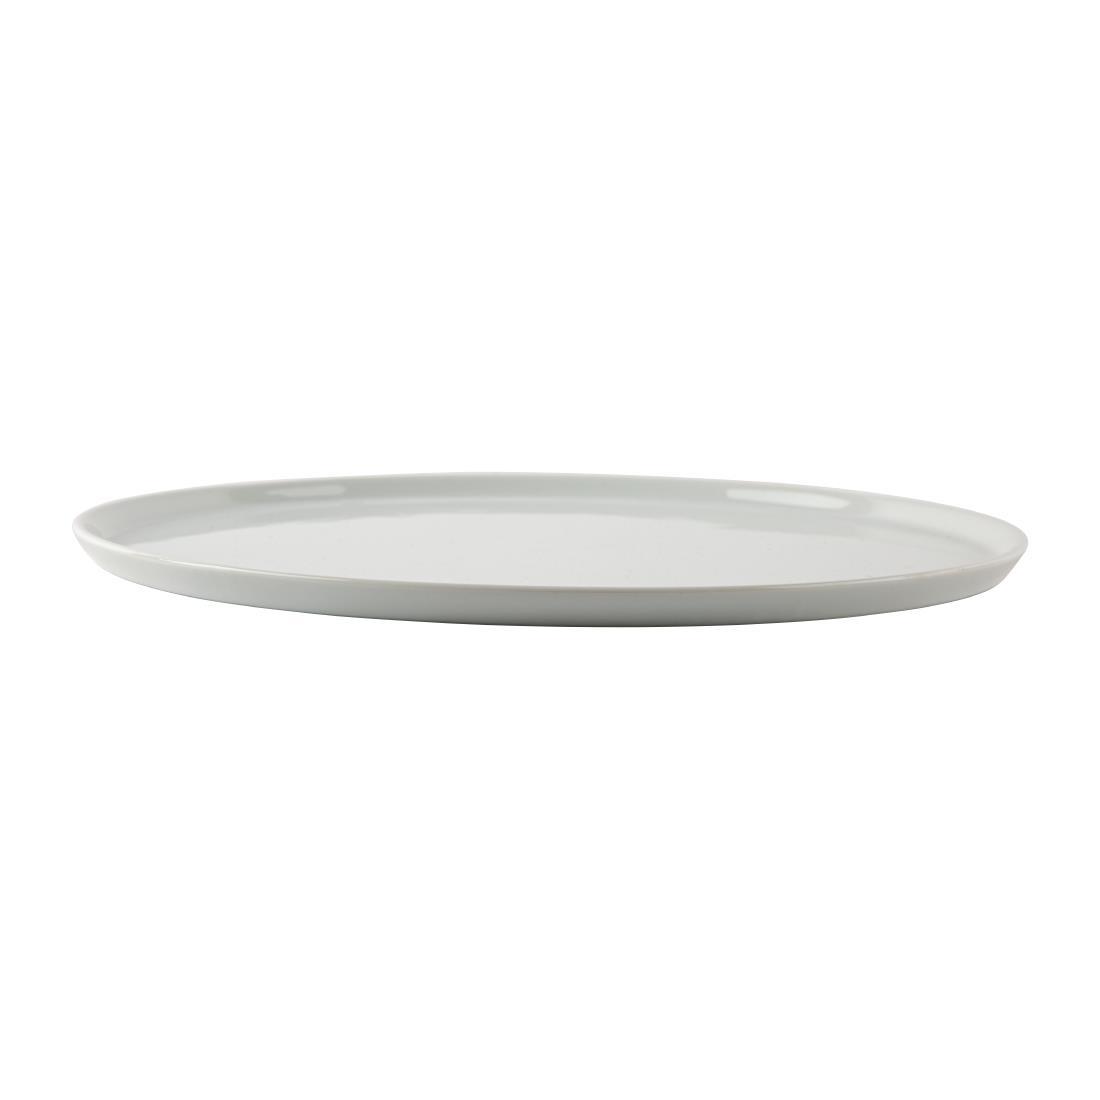 Olympia Whiteware Pizza Plates 330mm (Pack of 4) - CD723  - 6